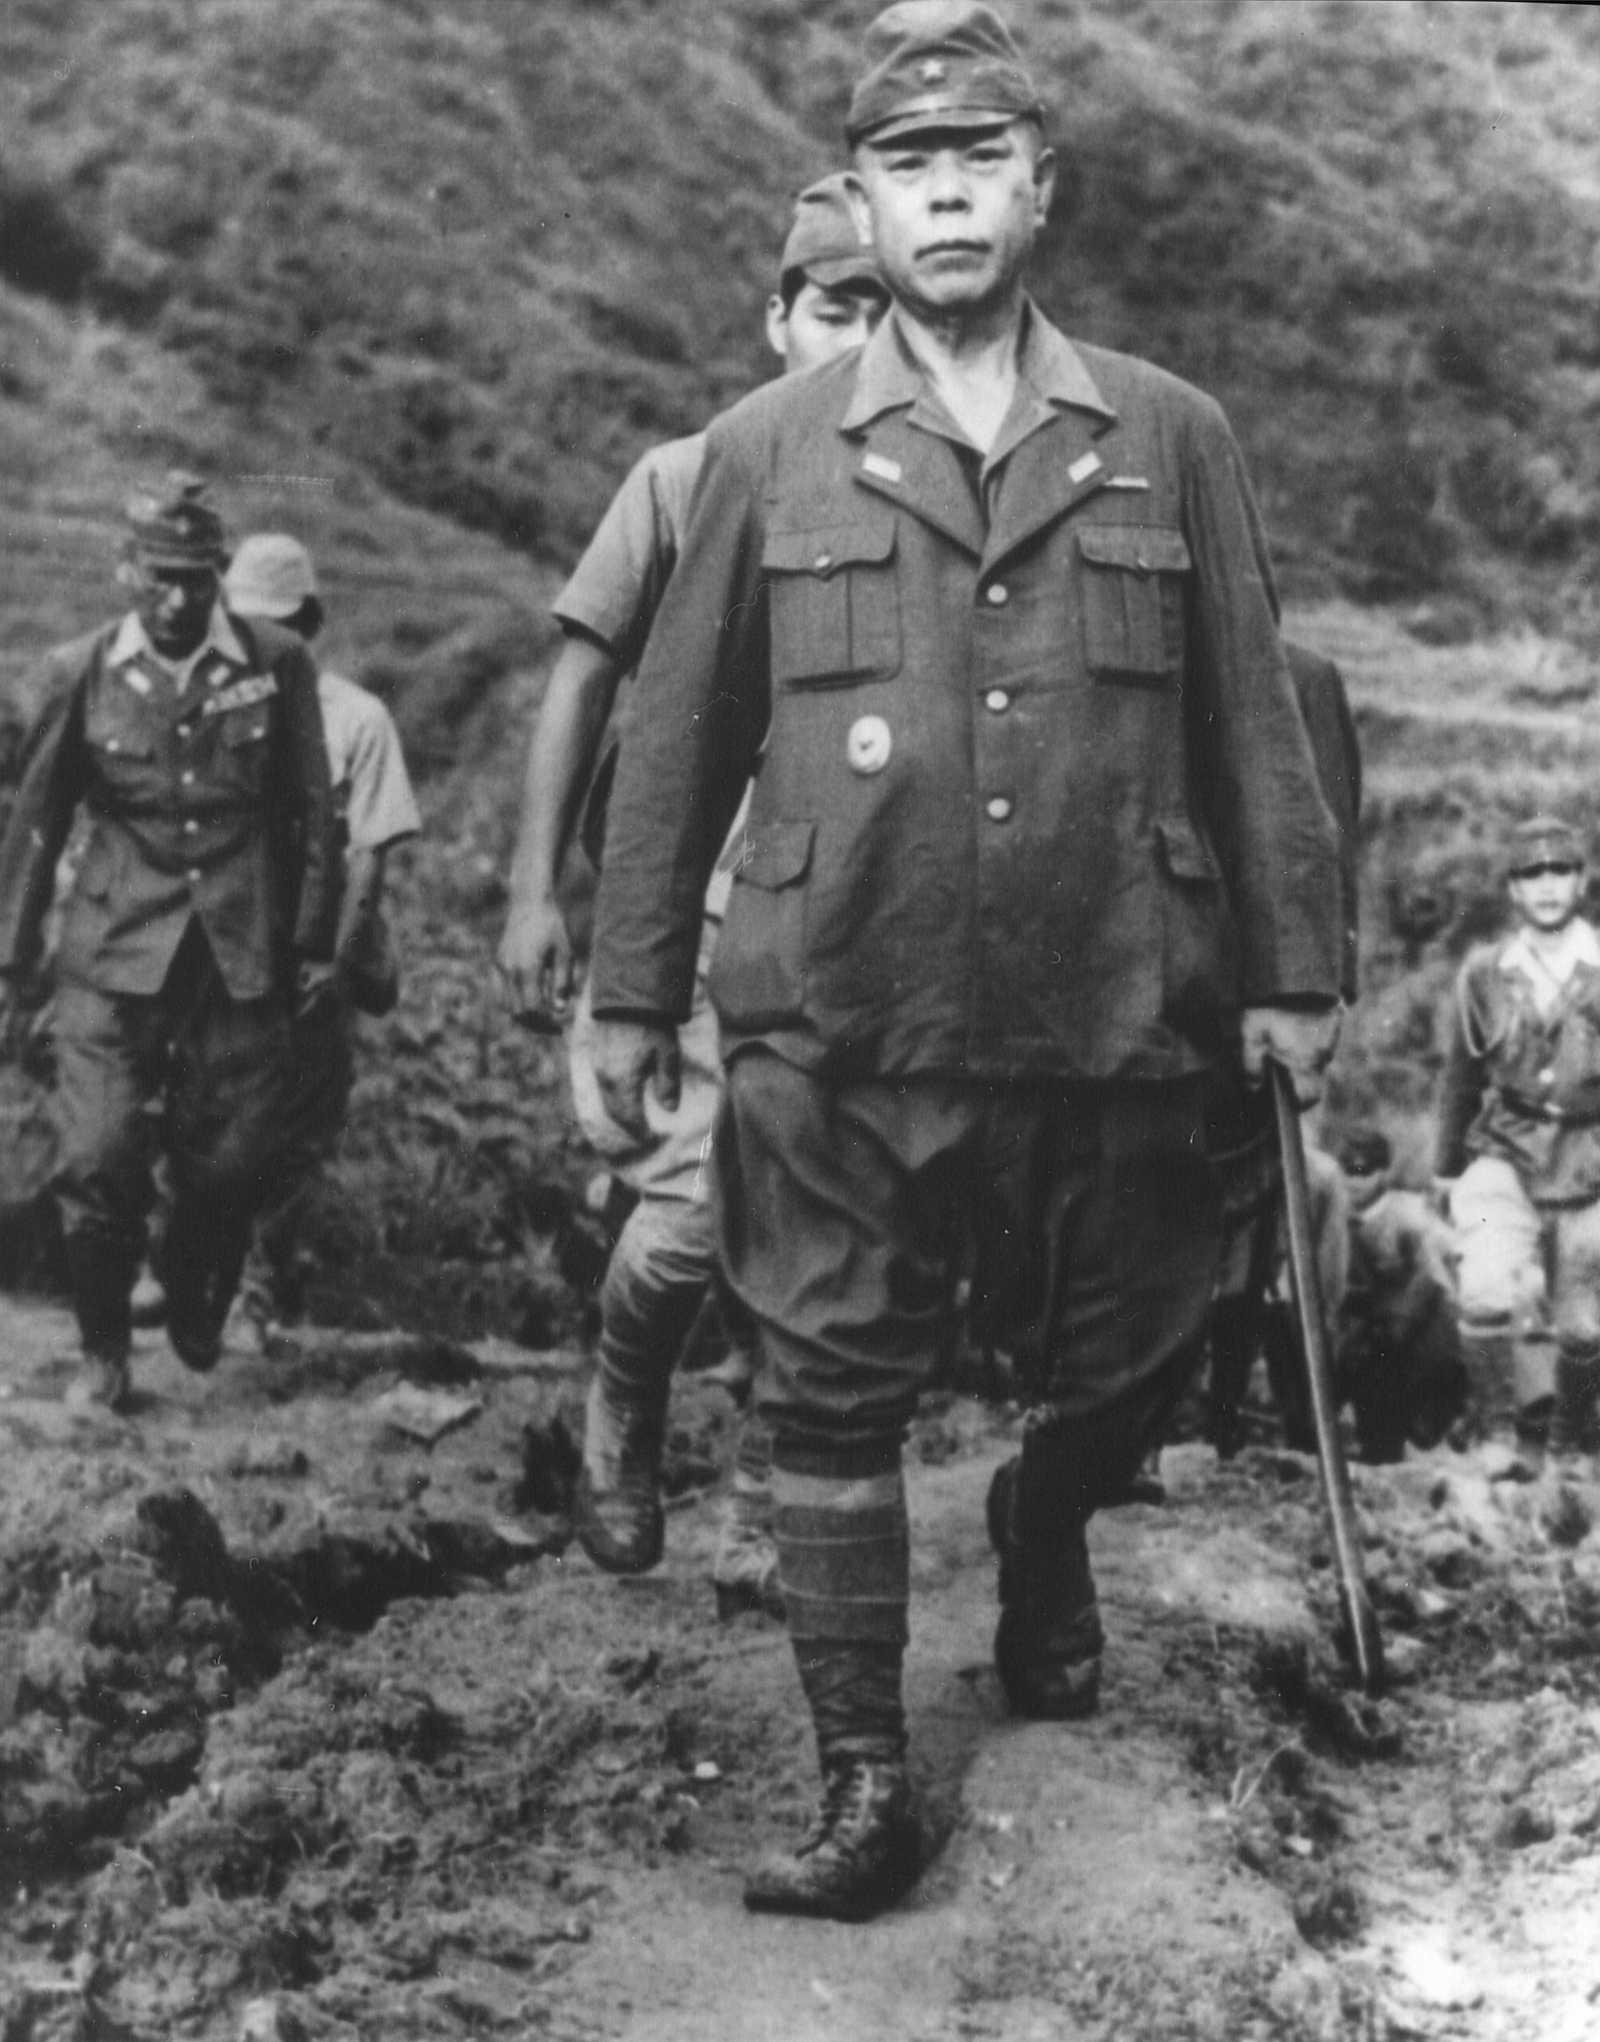 Photo of Japanese officer walking up mountain with others following behind